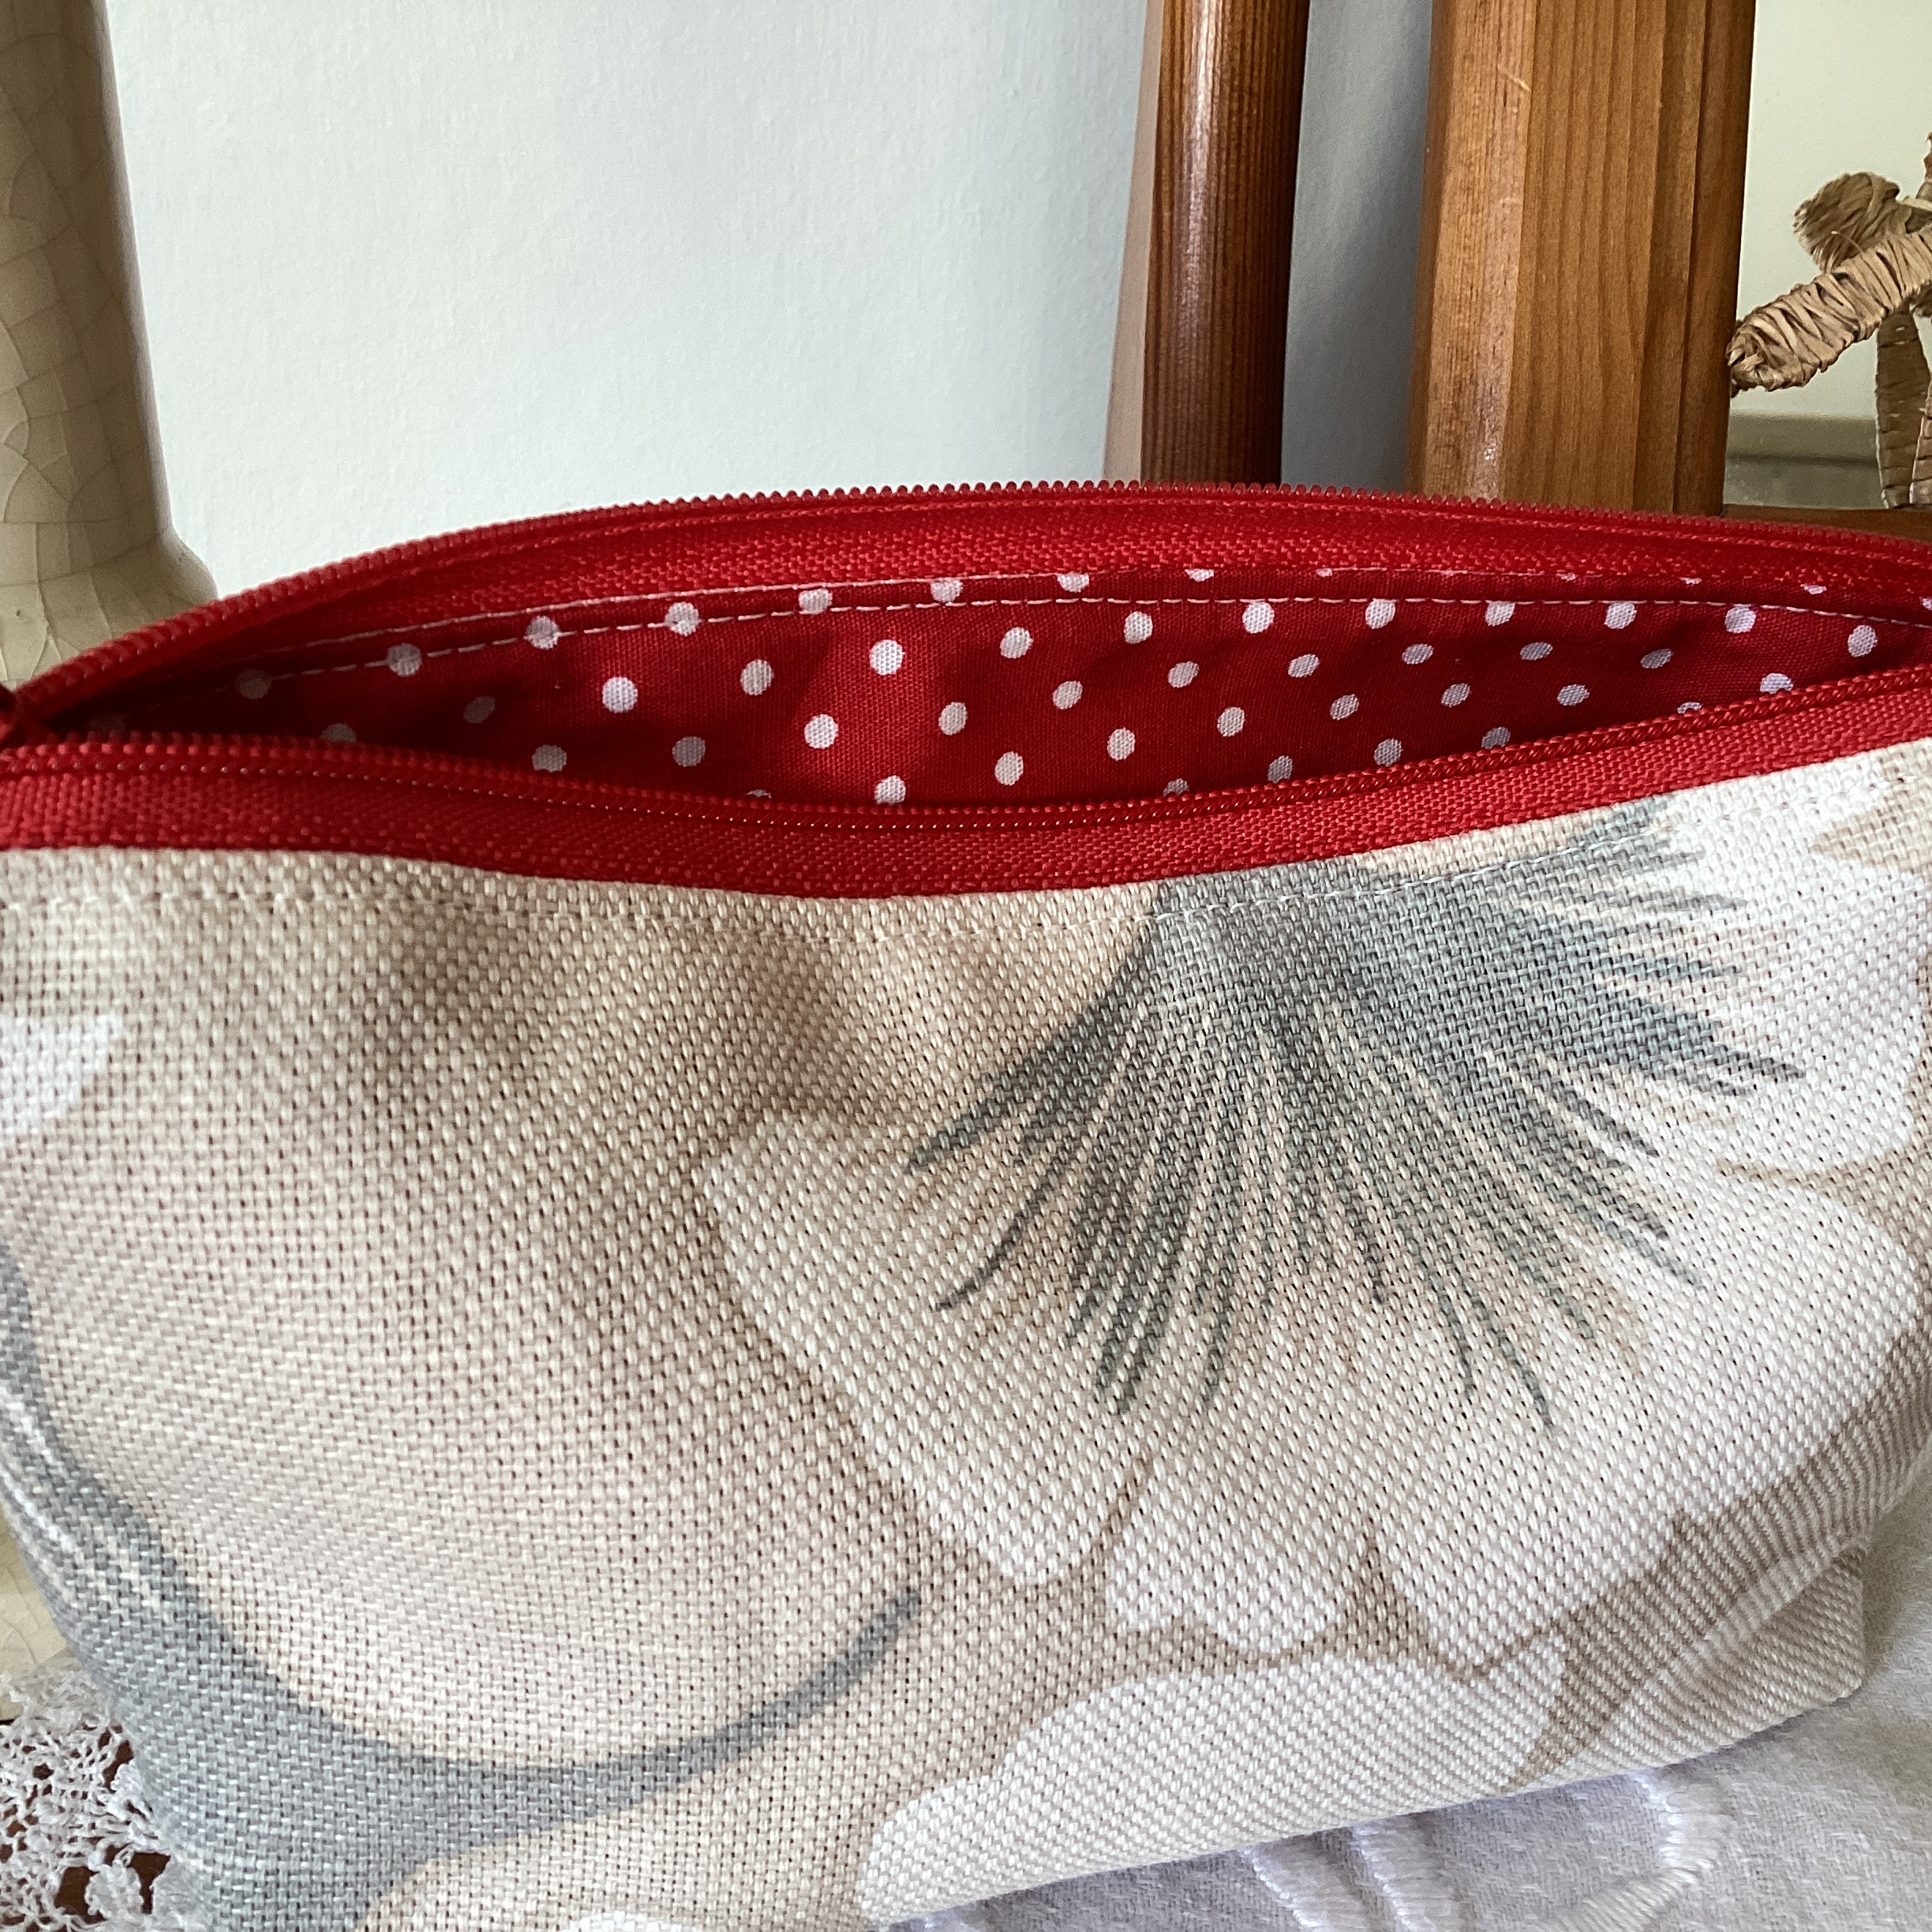 Zipped Pouch (small) - beige and grey flowers